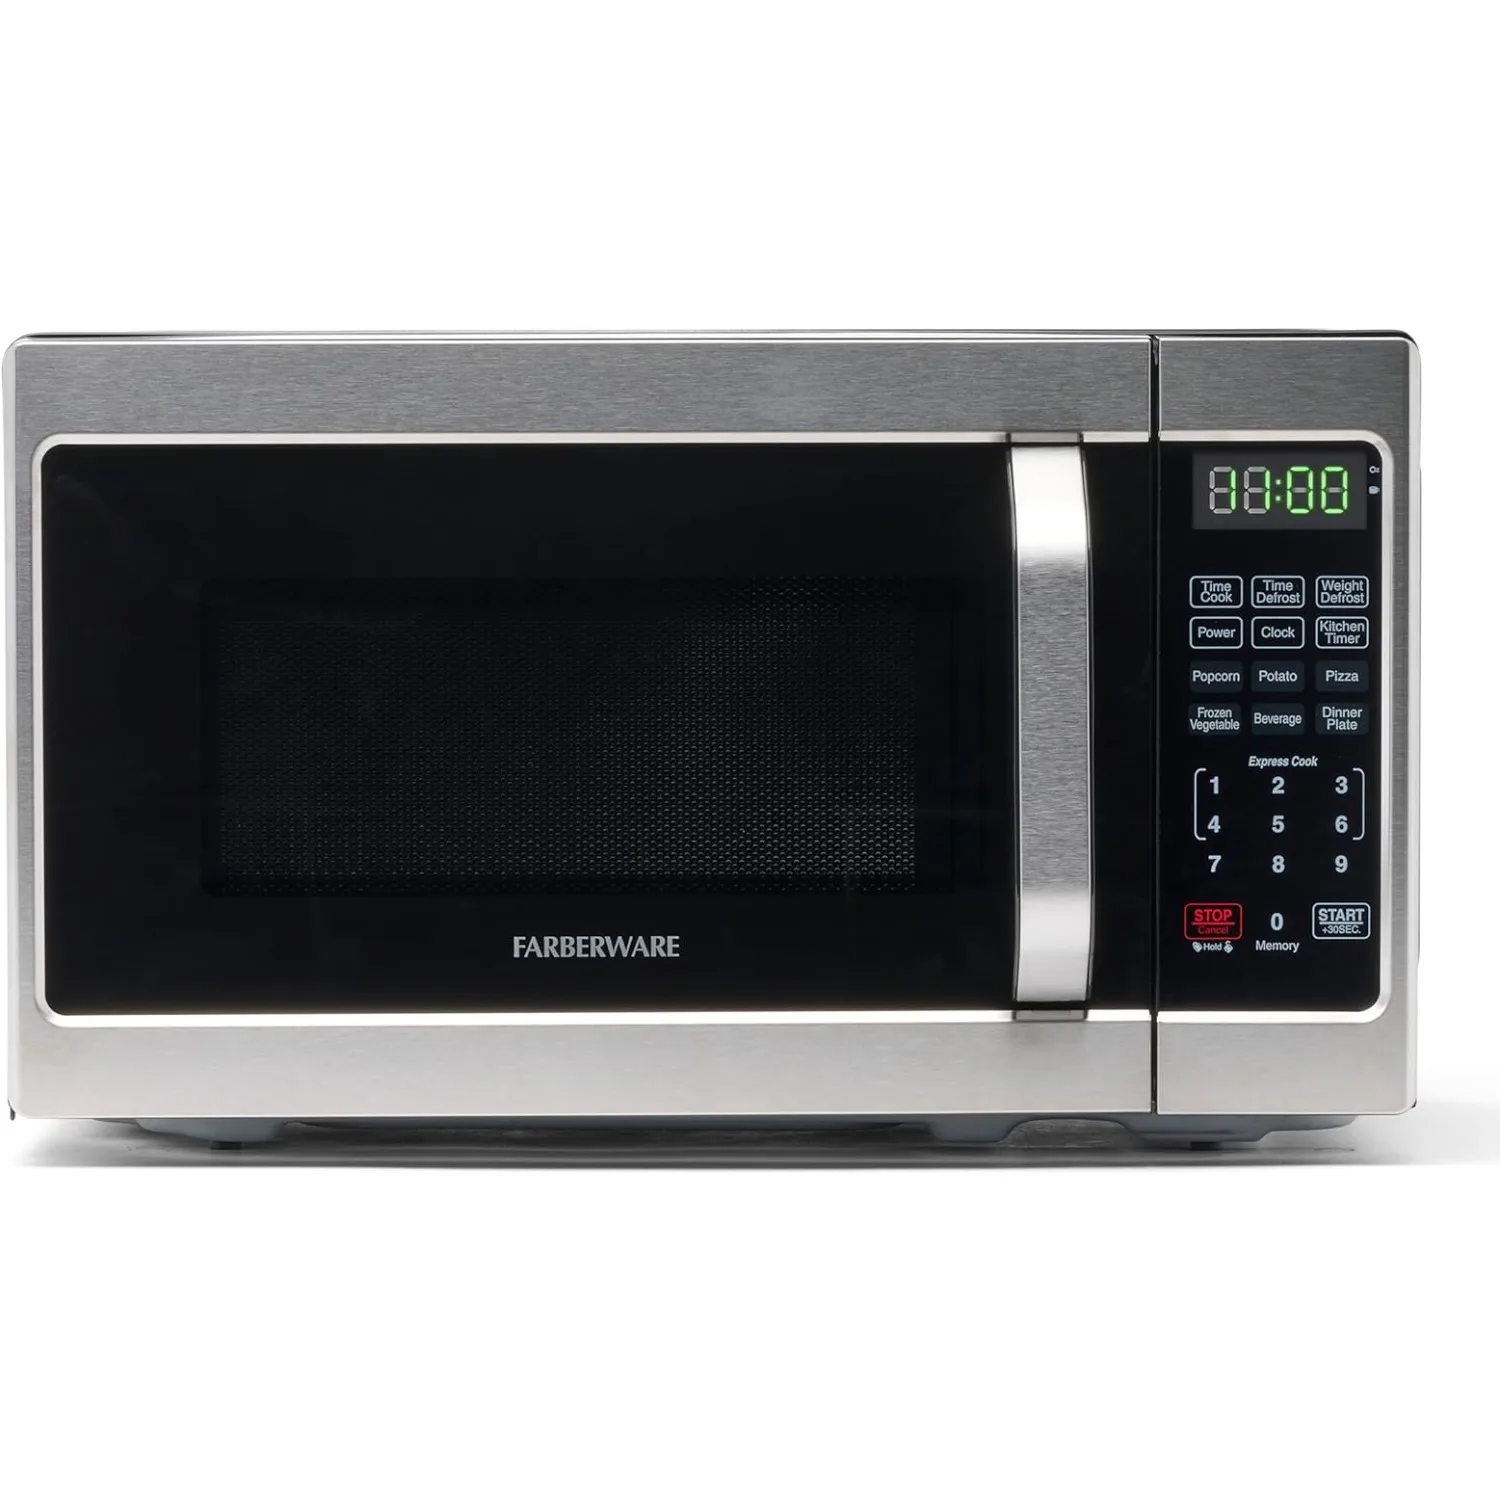 

Countertop Microwave 700 Watts, 0.7 Cu. Ft. - Microwave Oven W/ LED Lighting & Child Lock - Easy Clean Stainless Steel